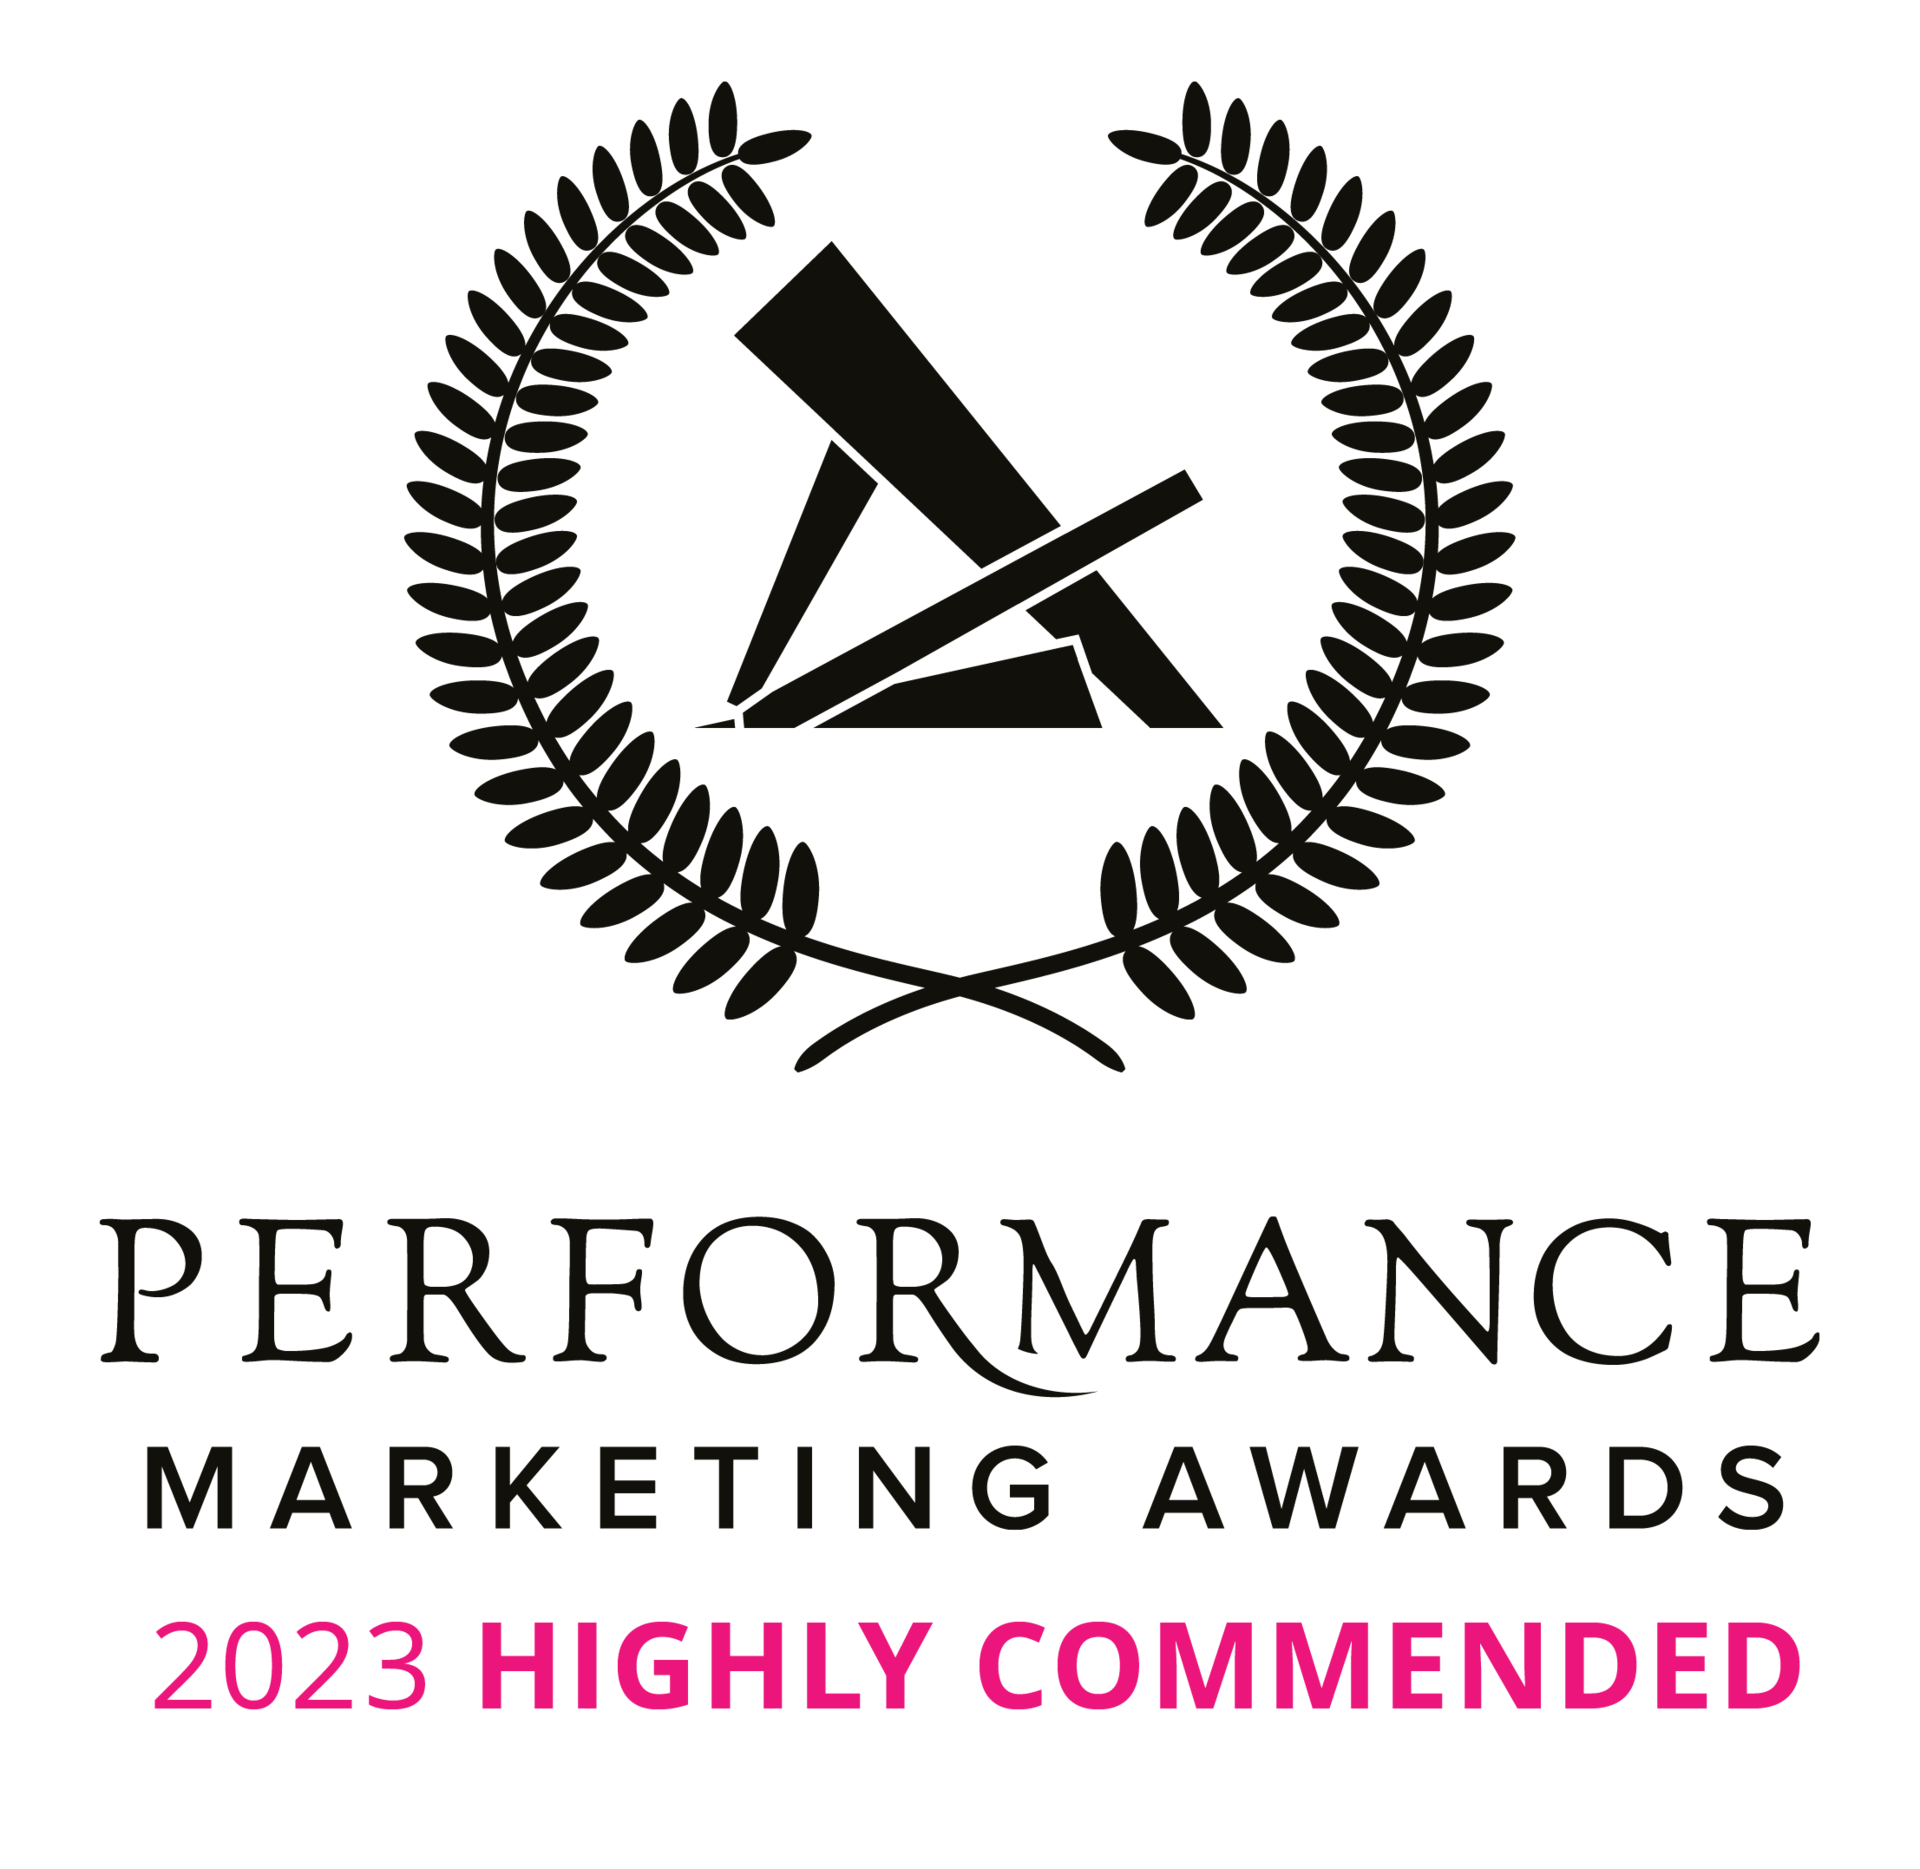 Highly Commended for the Performance Marketing Awards 2023